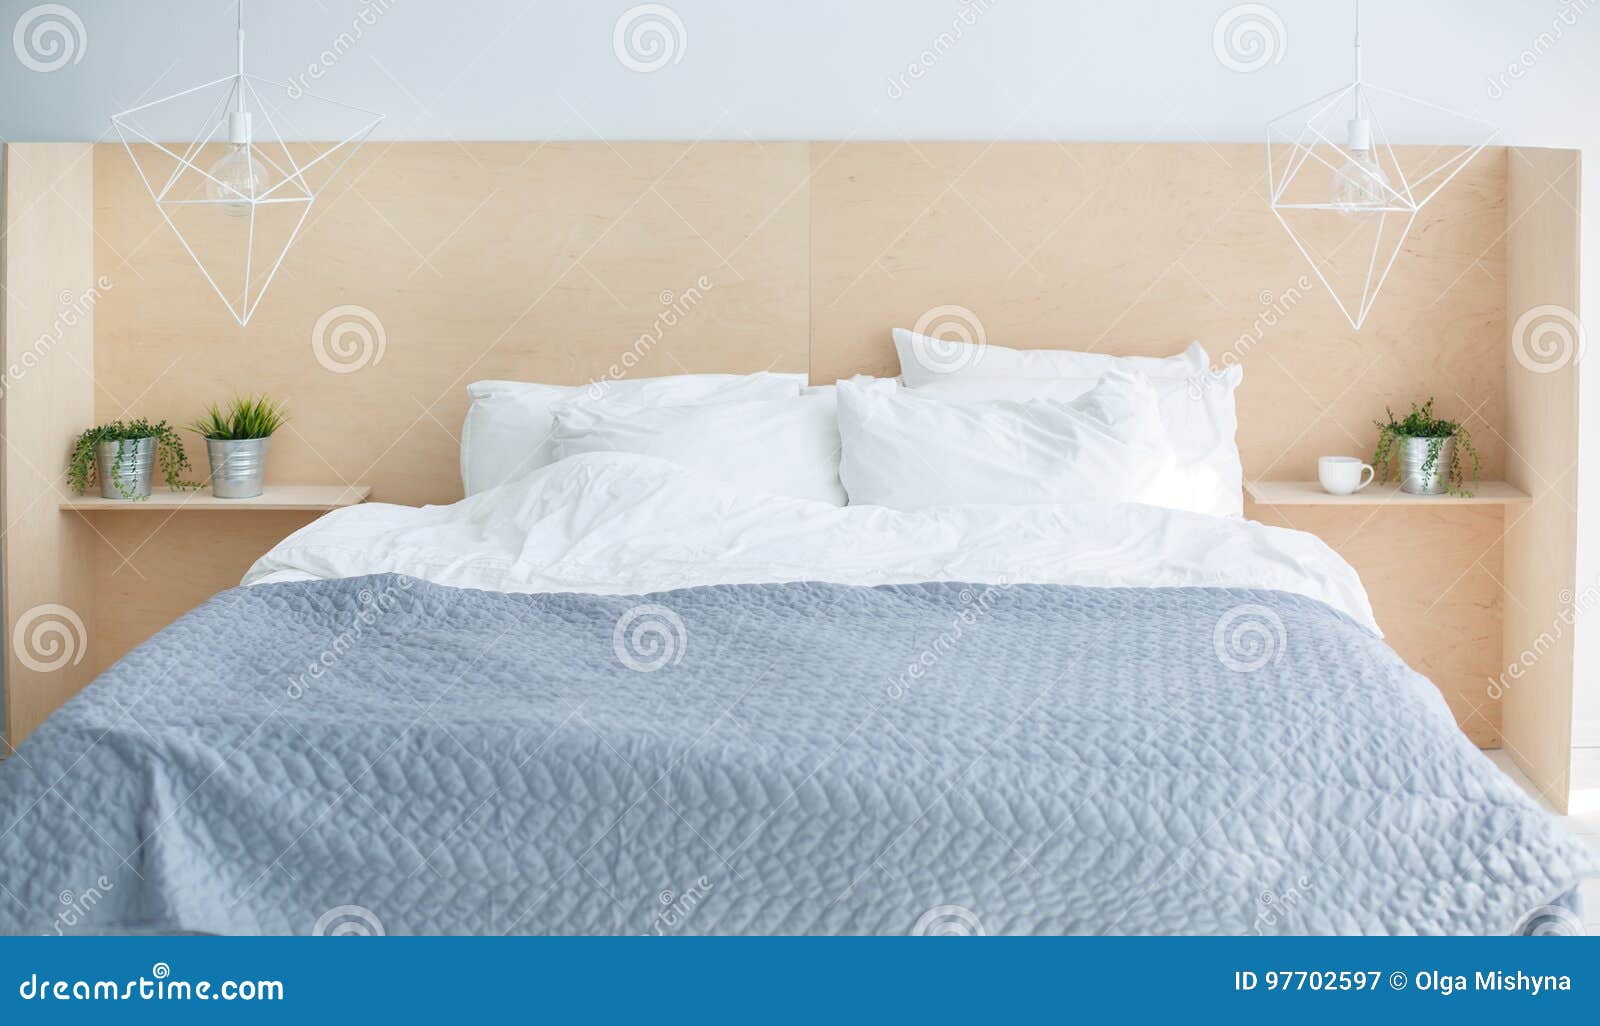 Grey Modern Bed with Wooden Bedside Stock Image - Image of carved ...